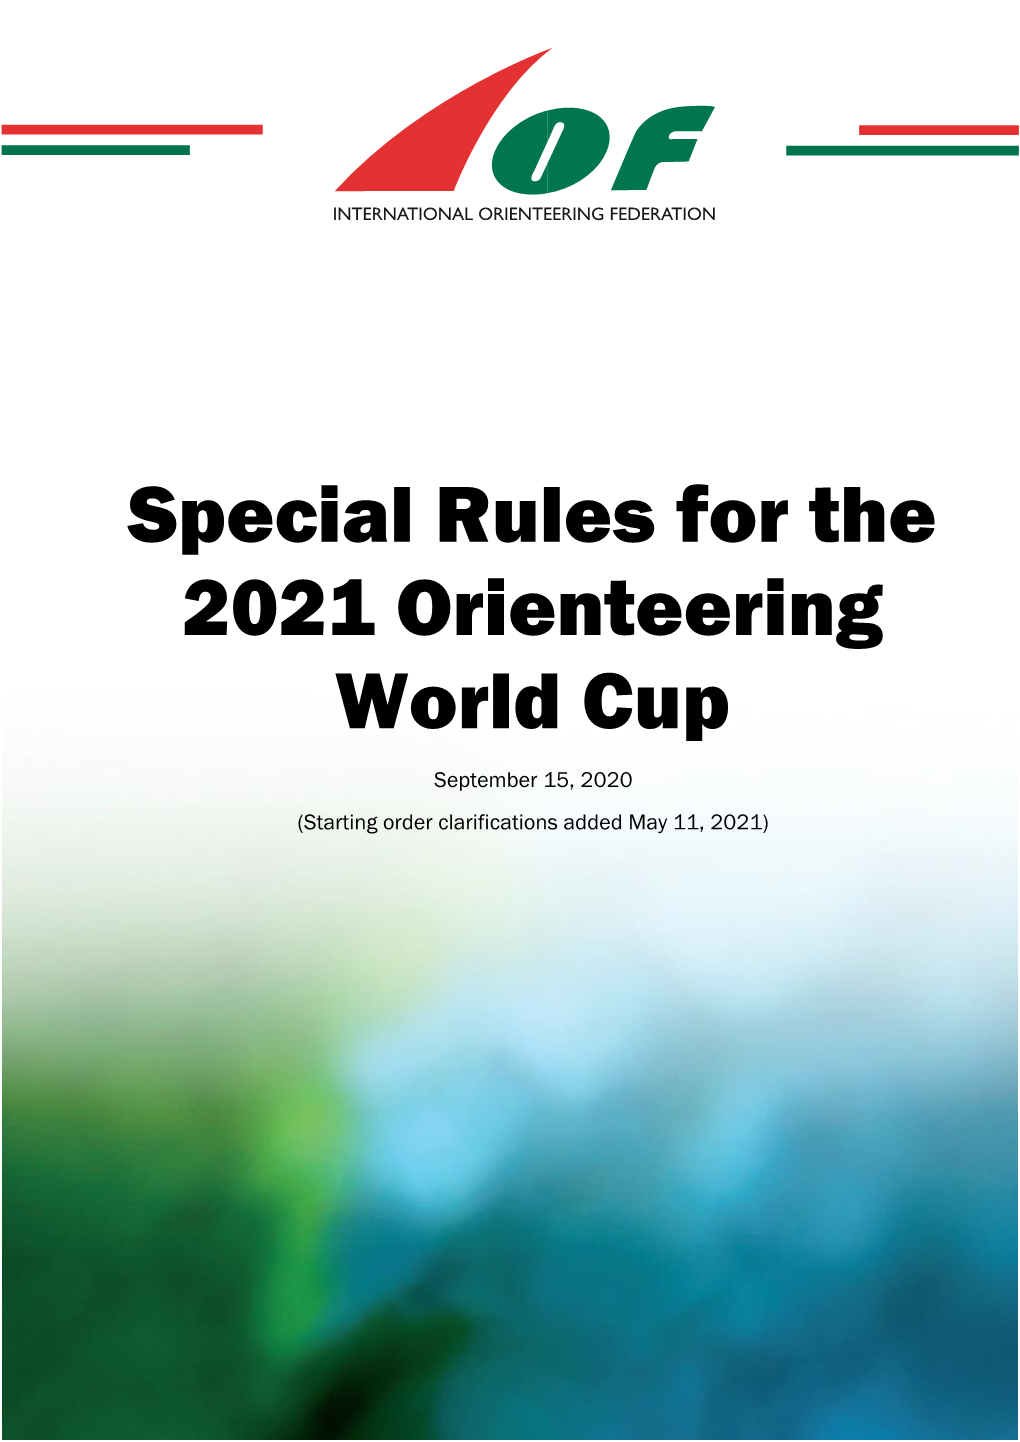 Special Rules for the 2021 Orienteering World Cup